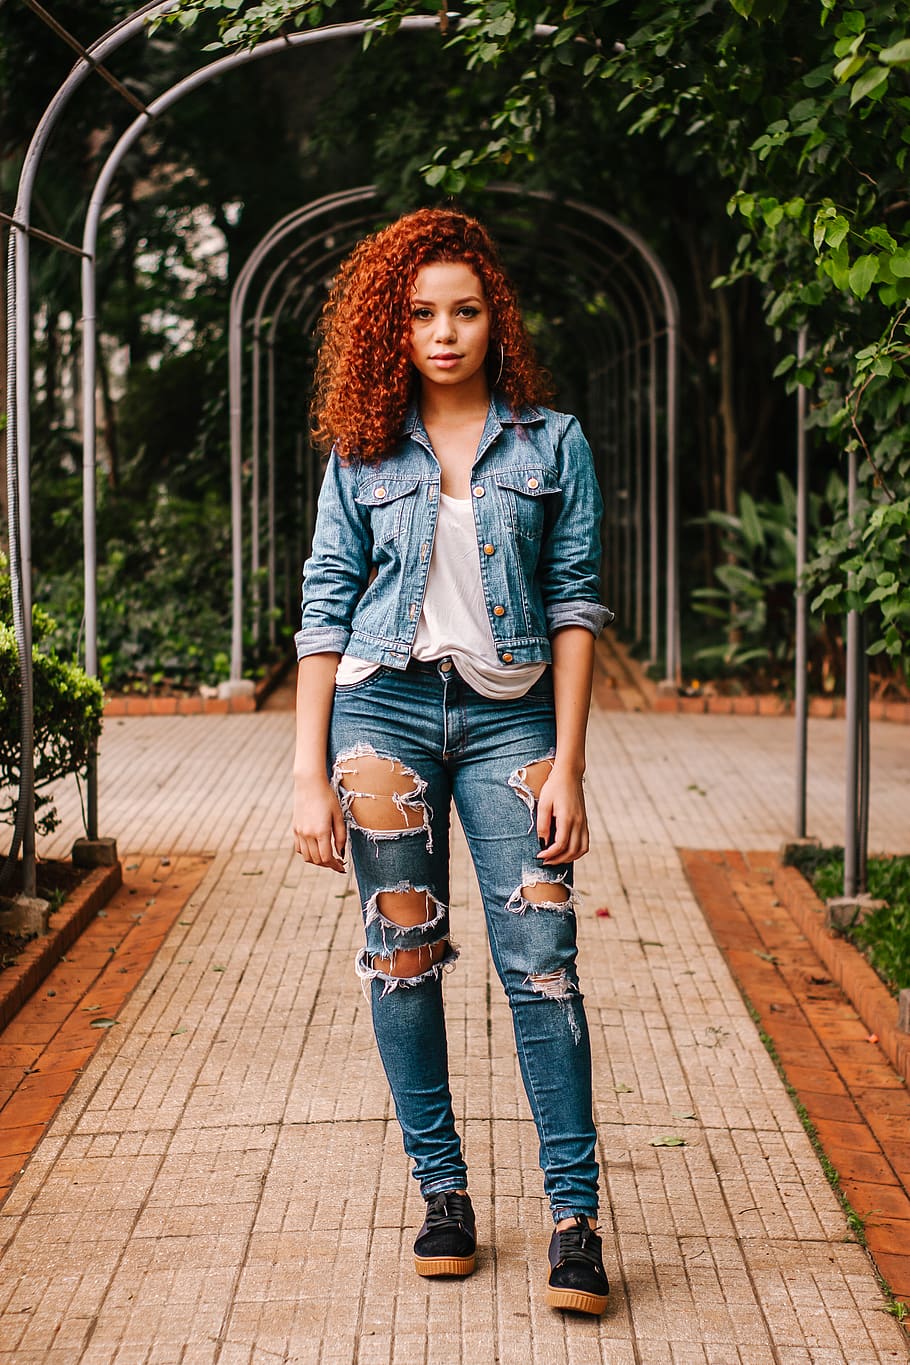 Woman In White Shirt, Blue Denim Jacket And Blue Distressed Denim Jeans Standing On Pathway, HD wallpaper